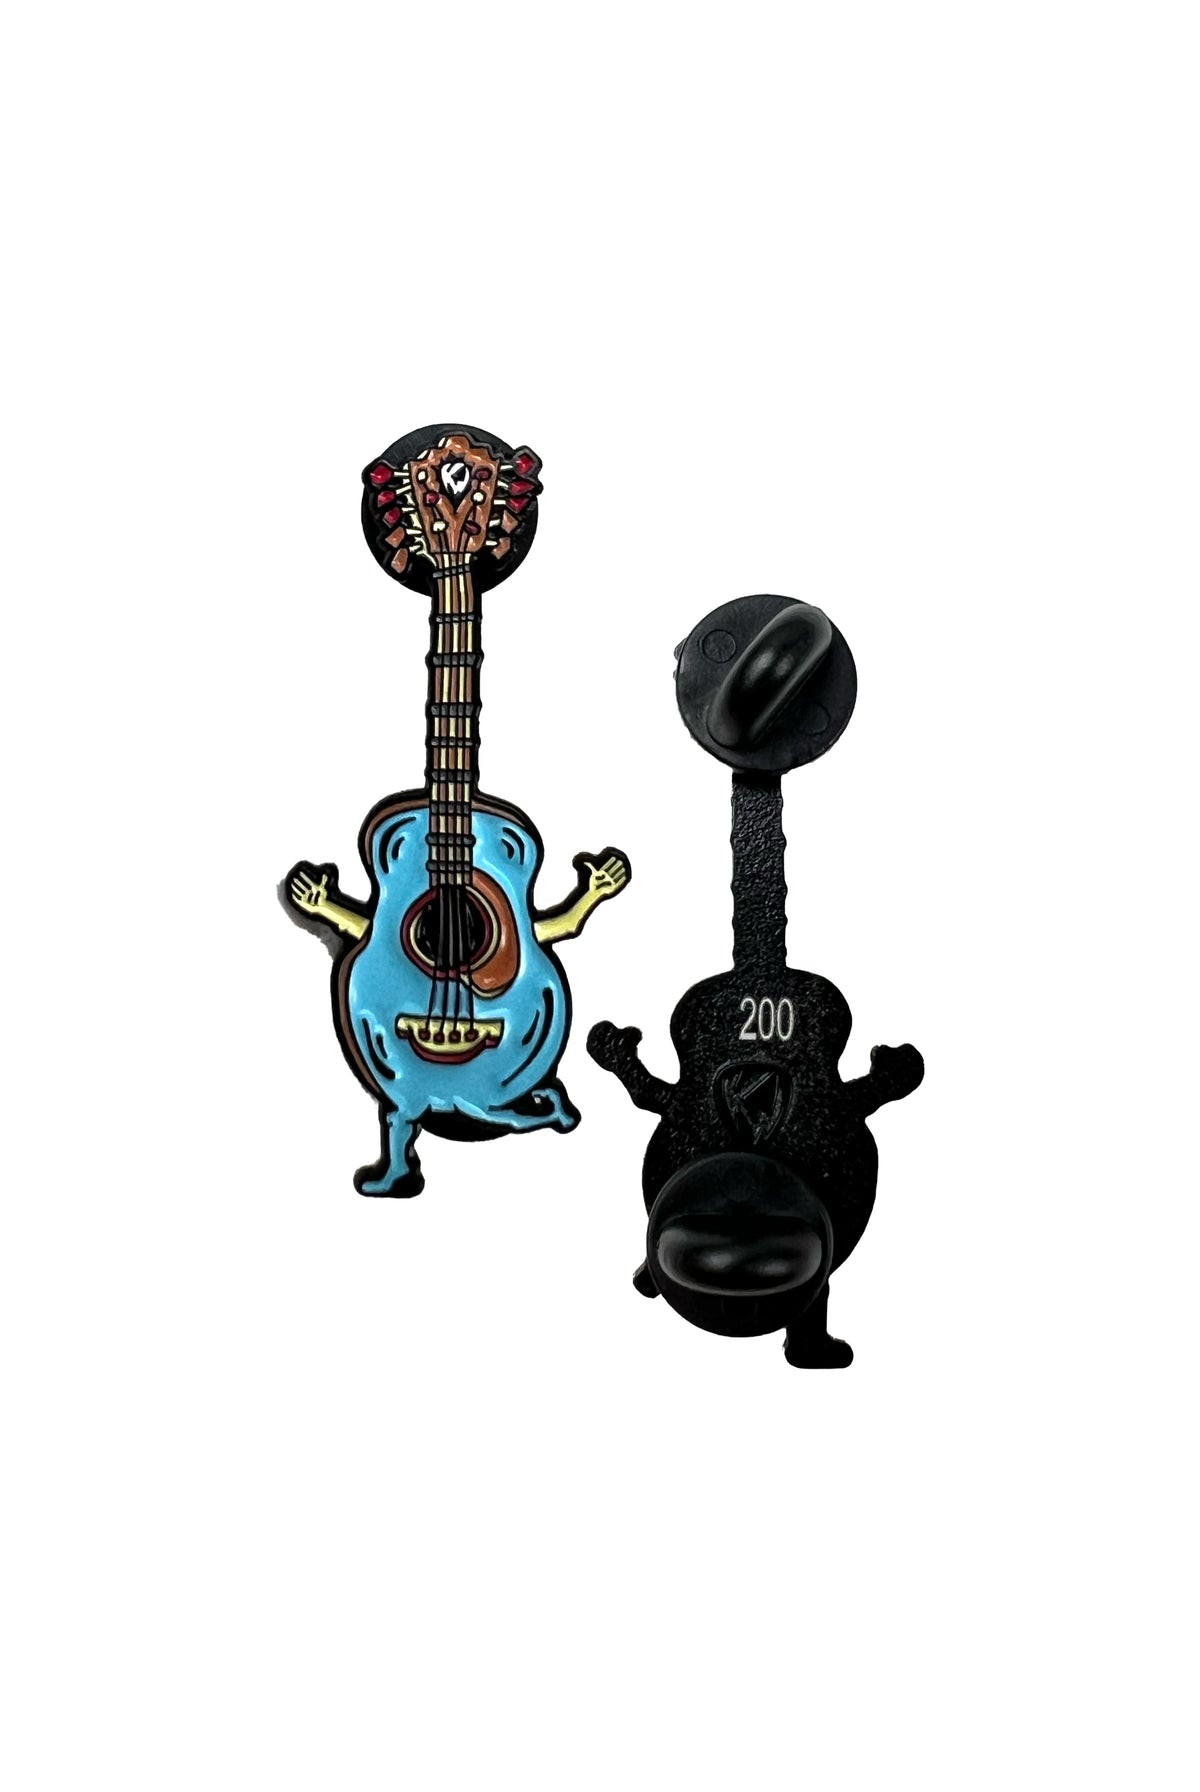 Limited Edition Dancing Guitar Pin